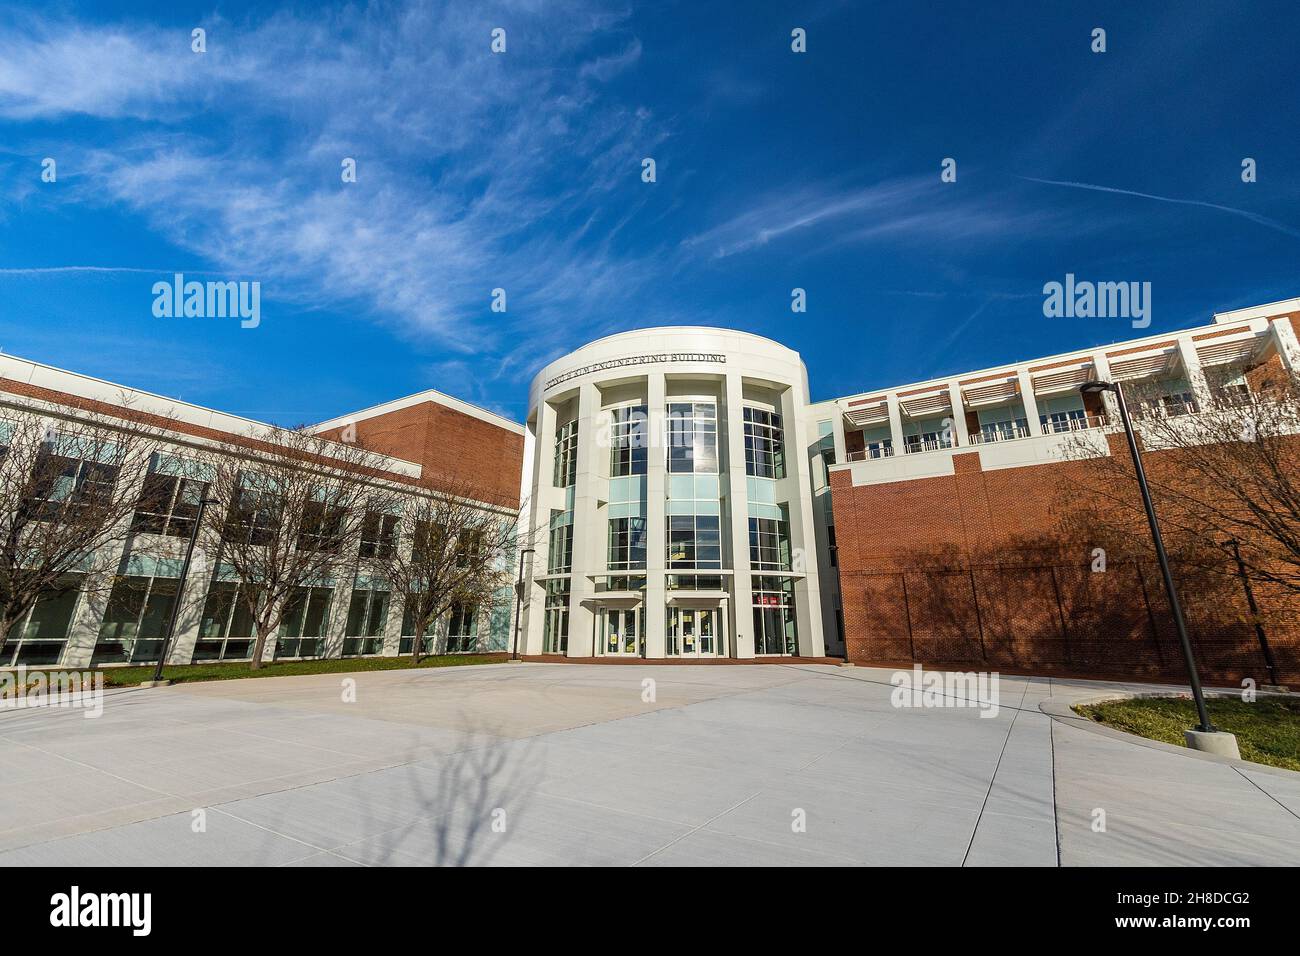 COLLEGE PARK, MD, USA - NOVEMBER 20: Kim Engineering Building on November 20, 2021 at the University of Maryland in College Park, Maryland. Stock Photo